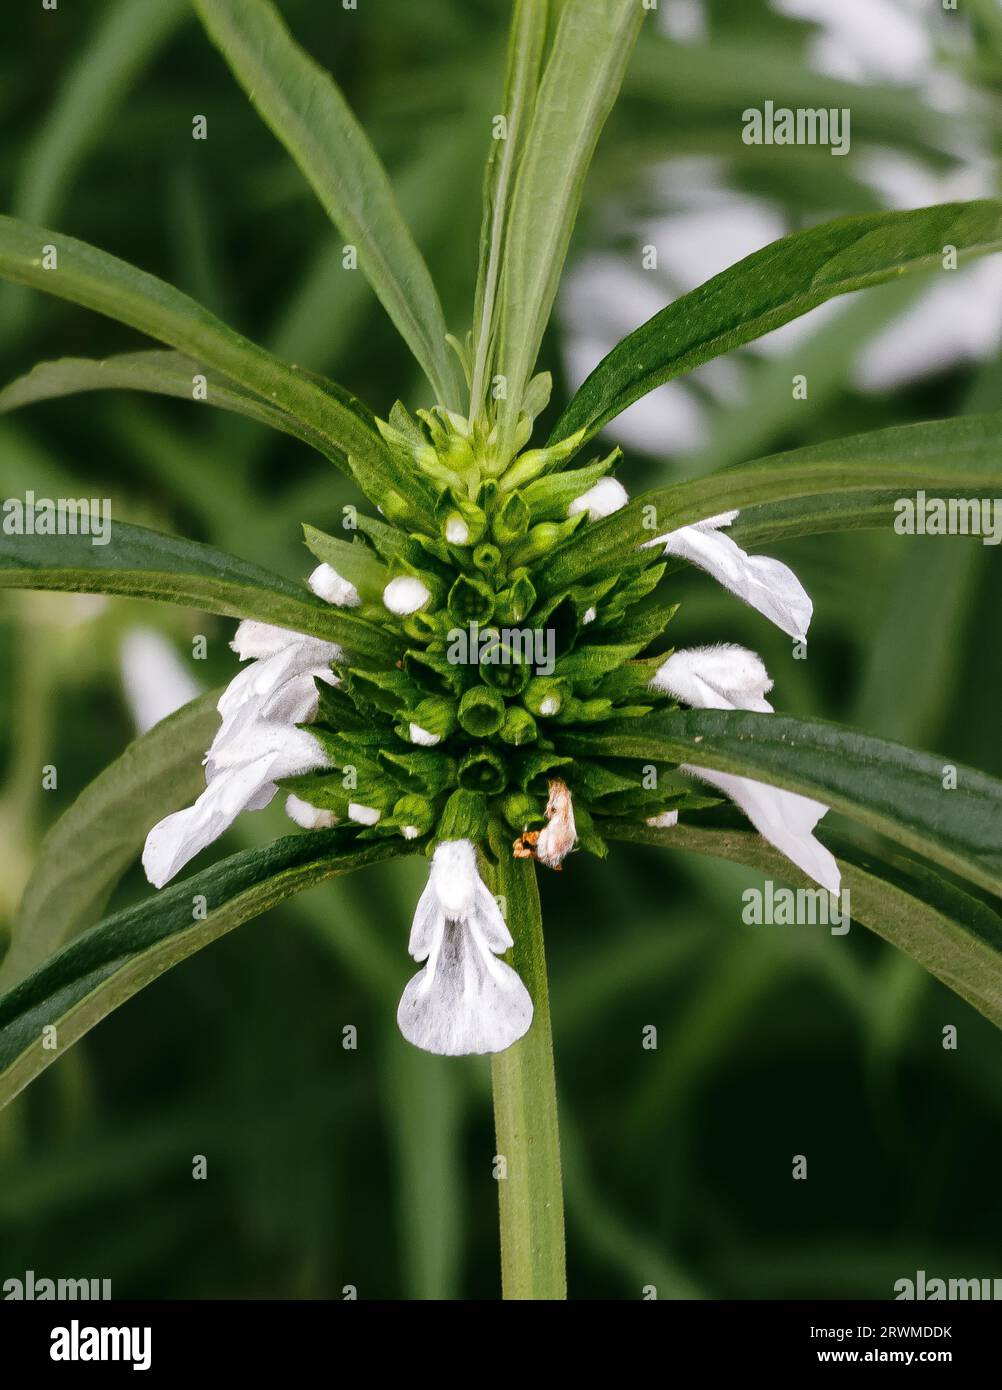 A close-up of a THUNMBA live plant (Leucas zeylanica), with lush green leaves and white flowers Stock Photo